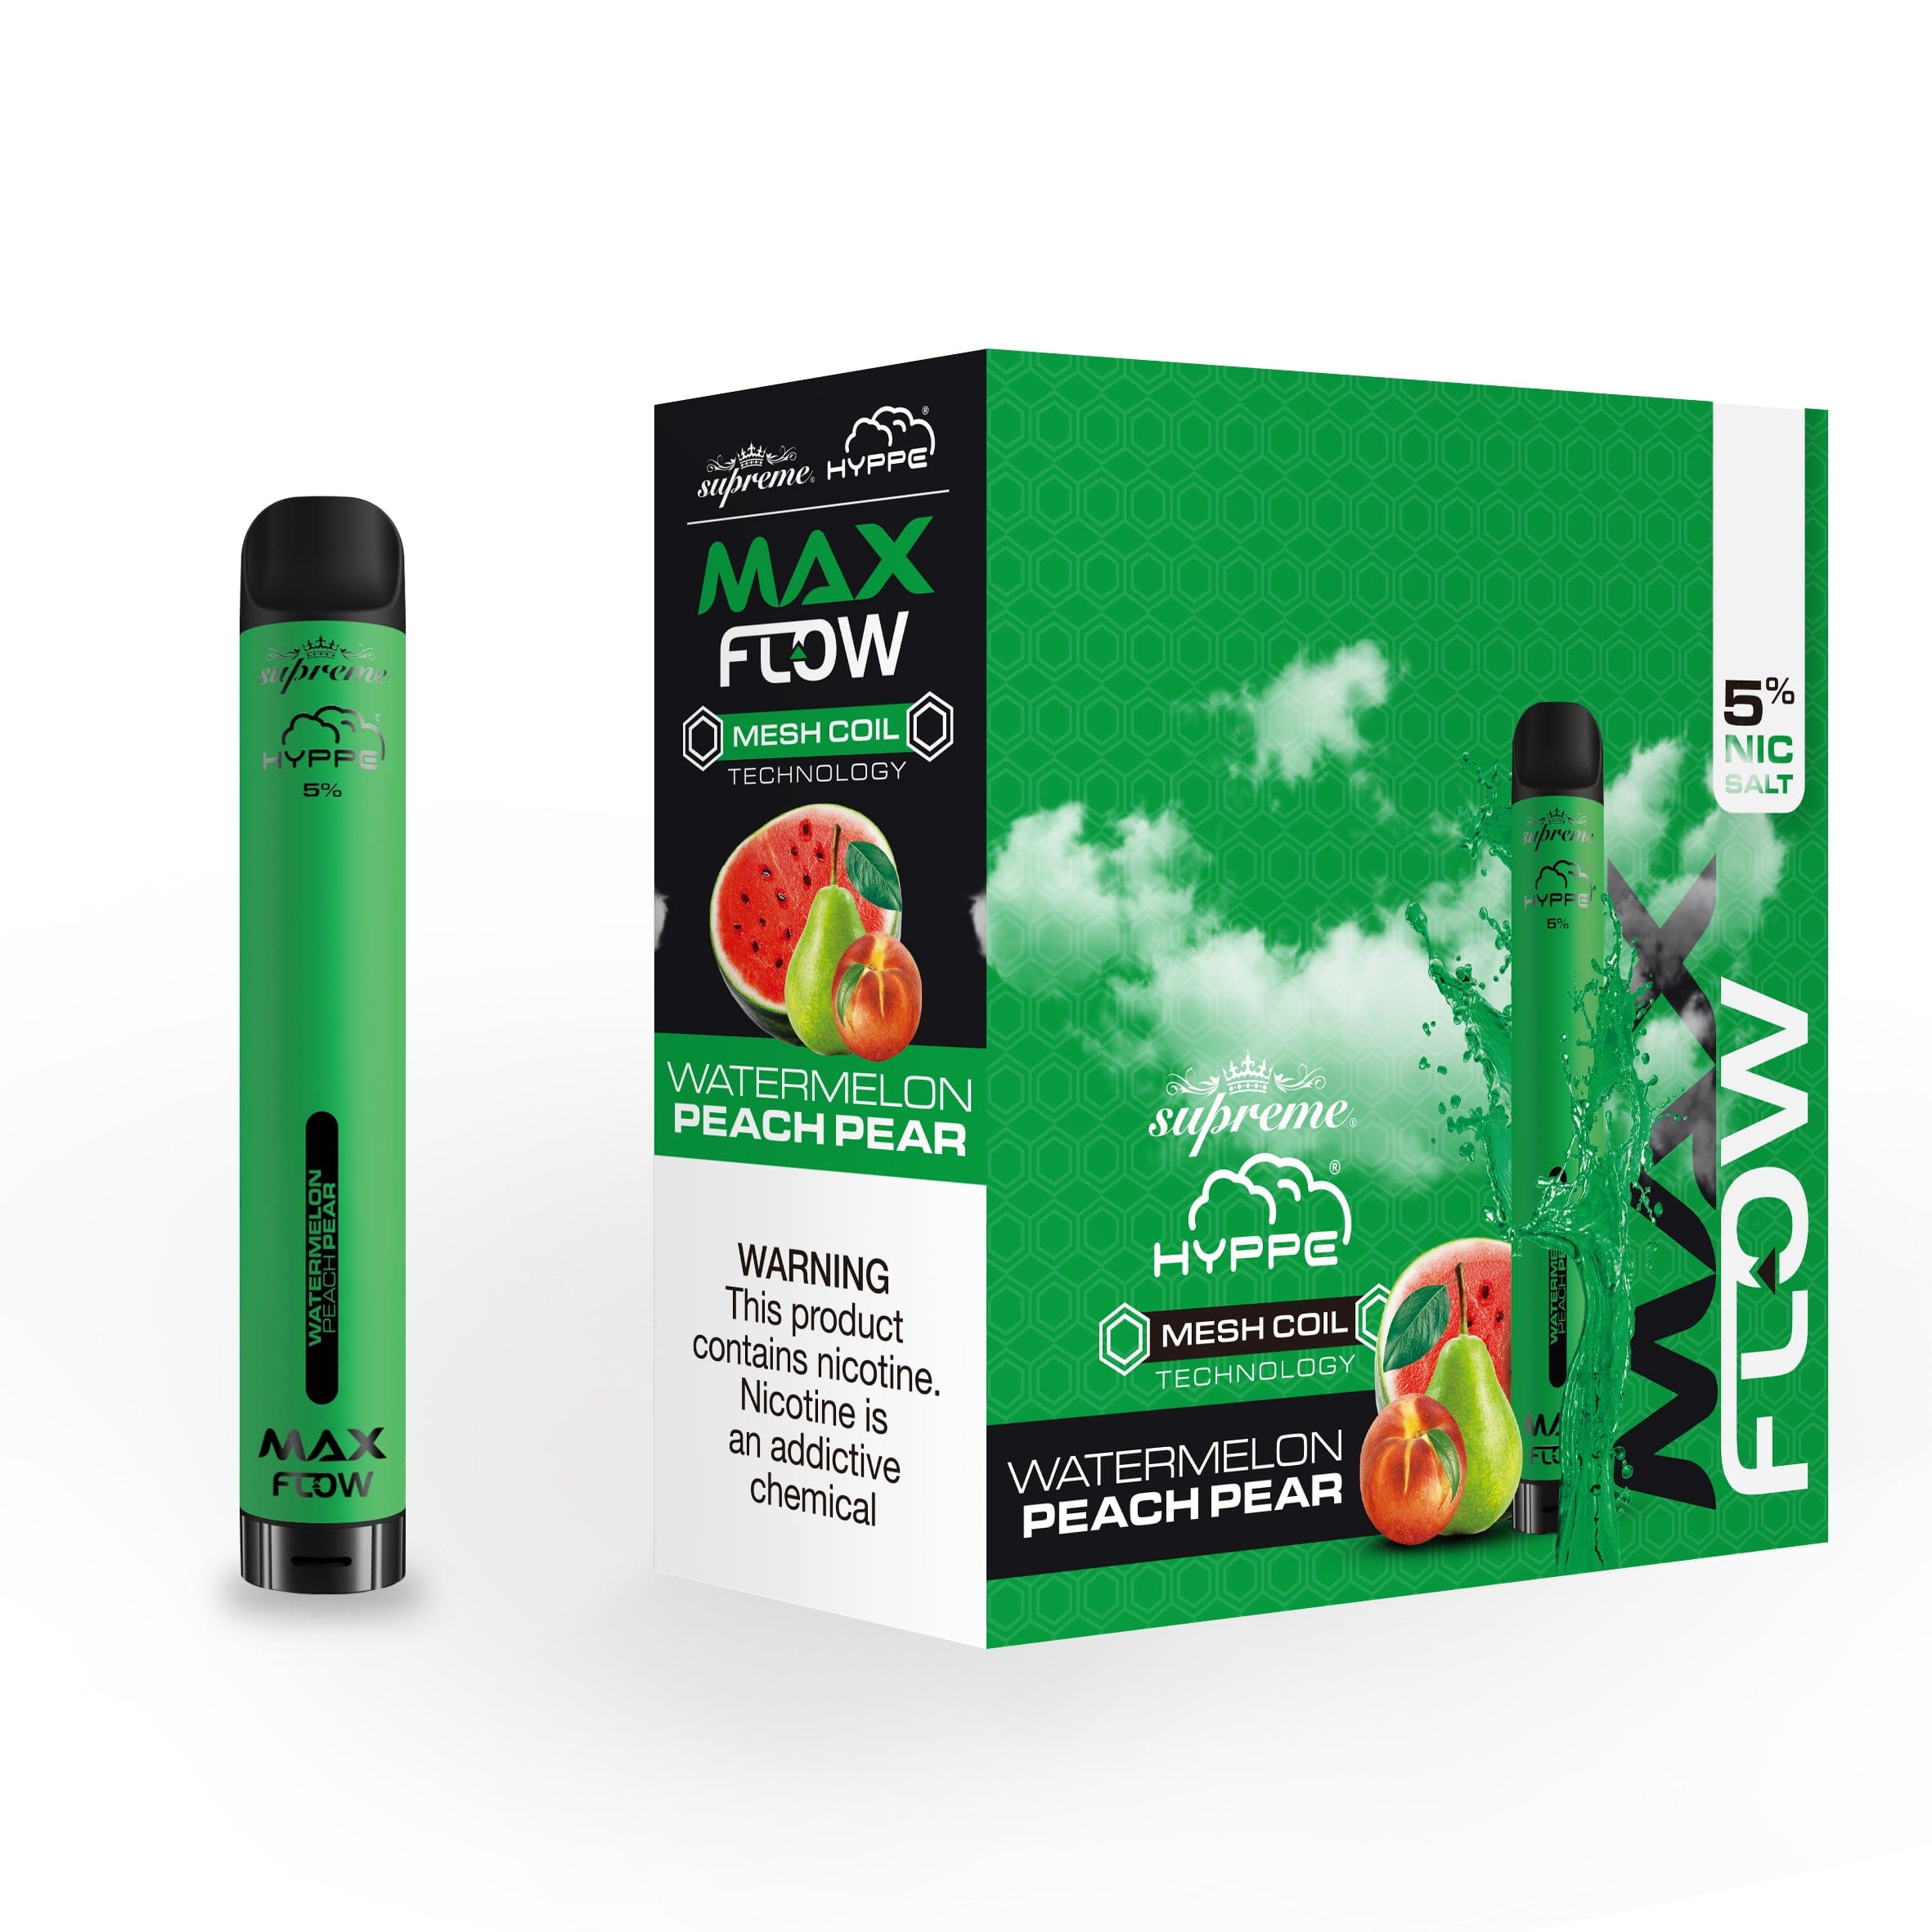 Hype Bar Disposable Vape Watermelon Peach Pear Hyppe Max Flow Disposable with Mesh Coil